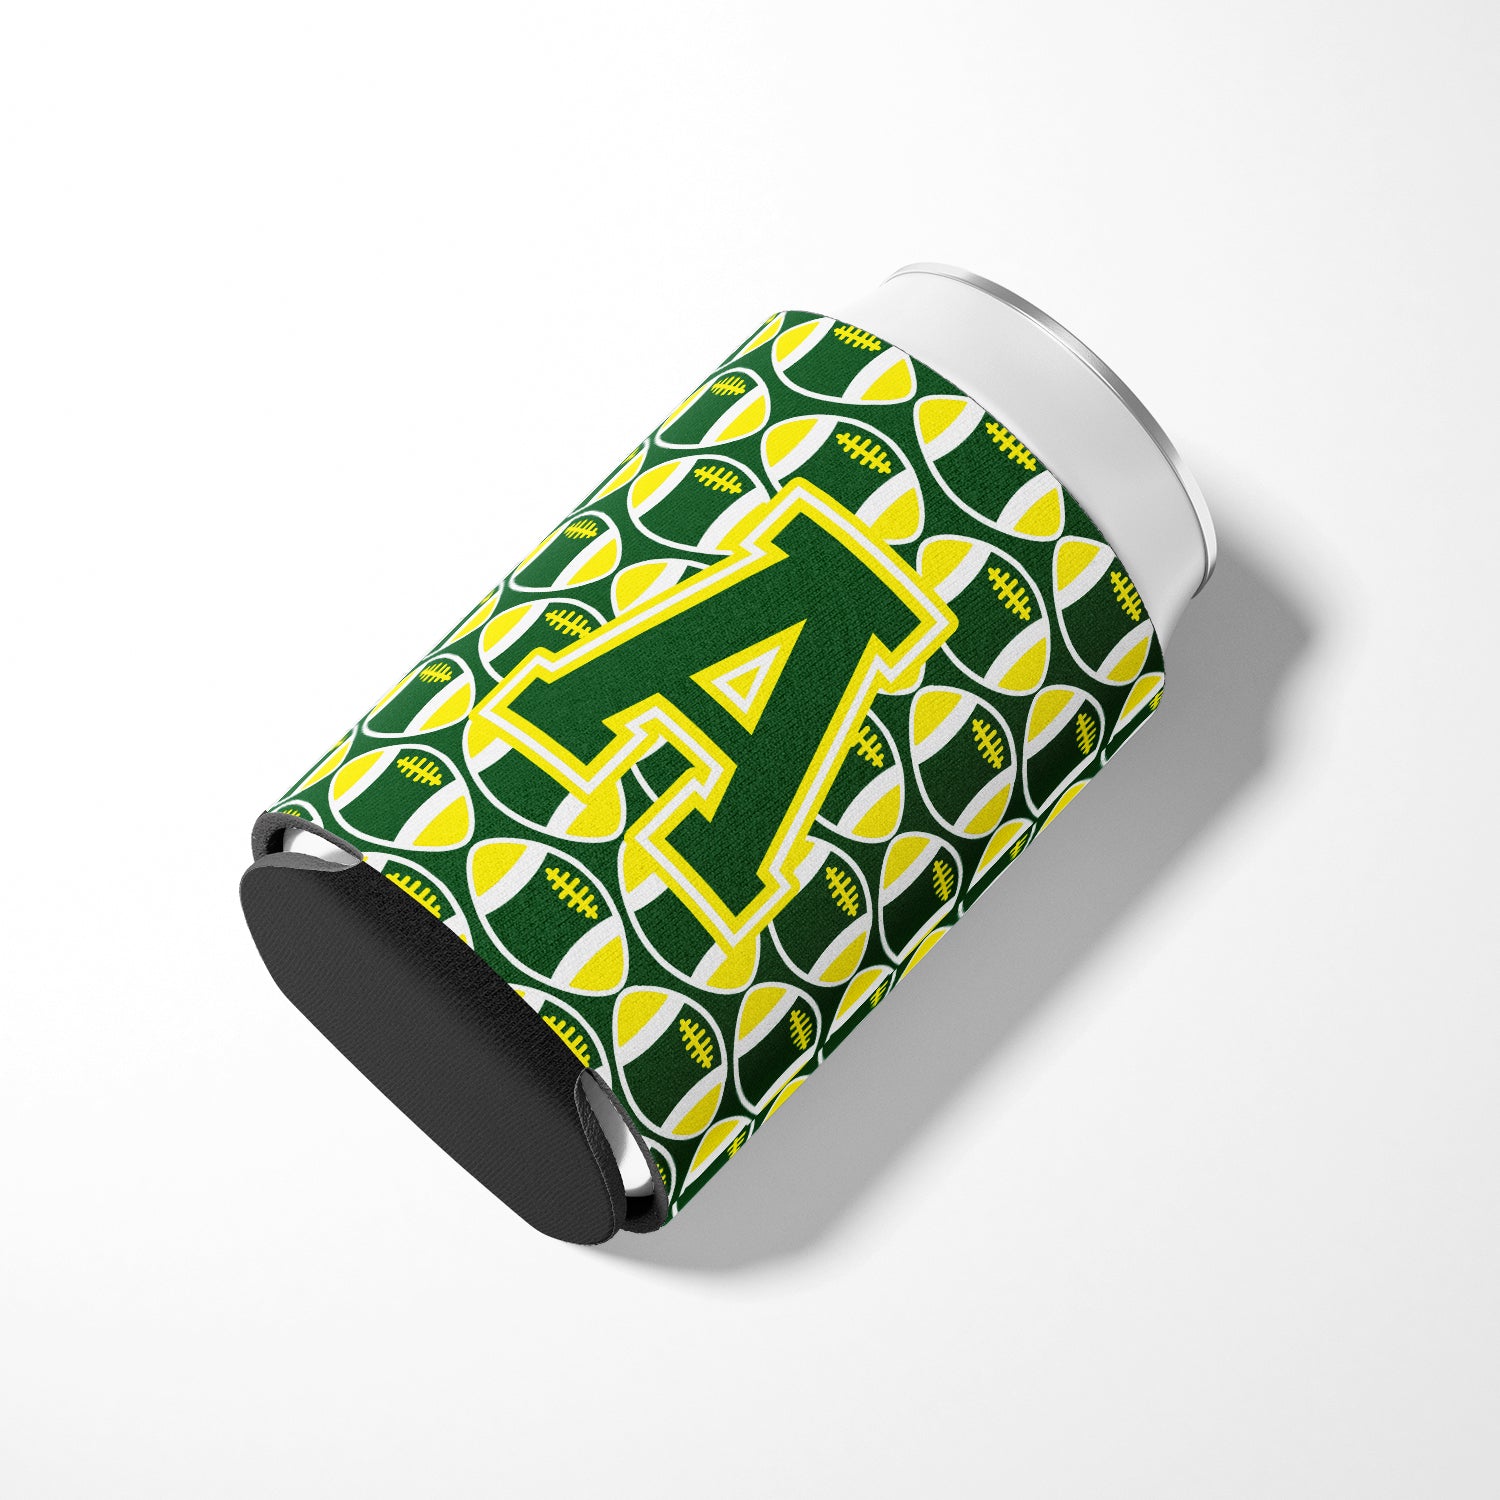 Letter A Football Green and Yellow Can or Bottle Hugger CJ1075-ACC